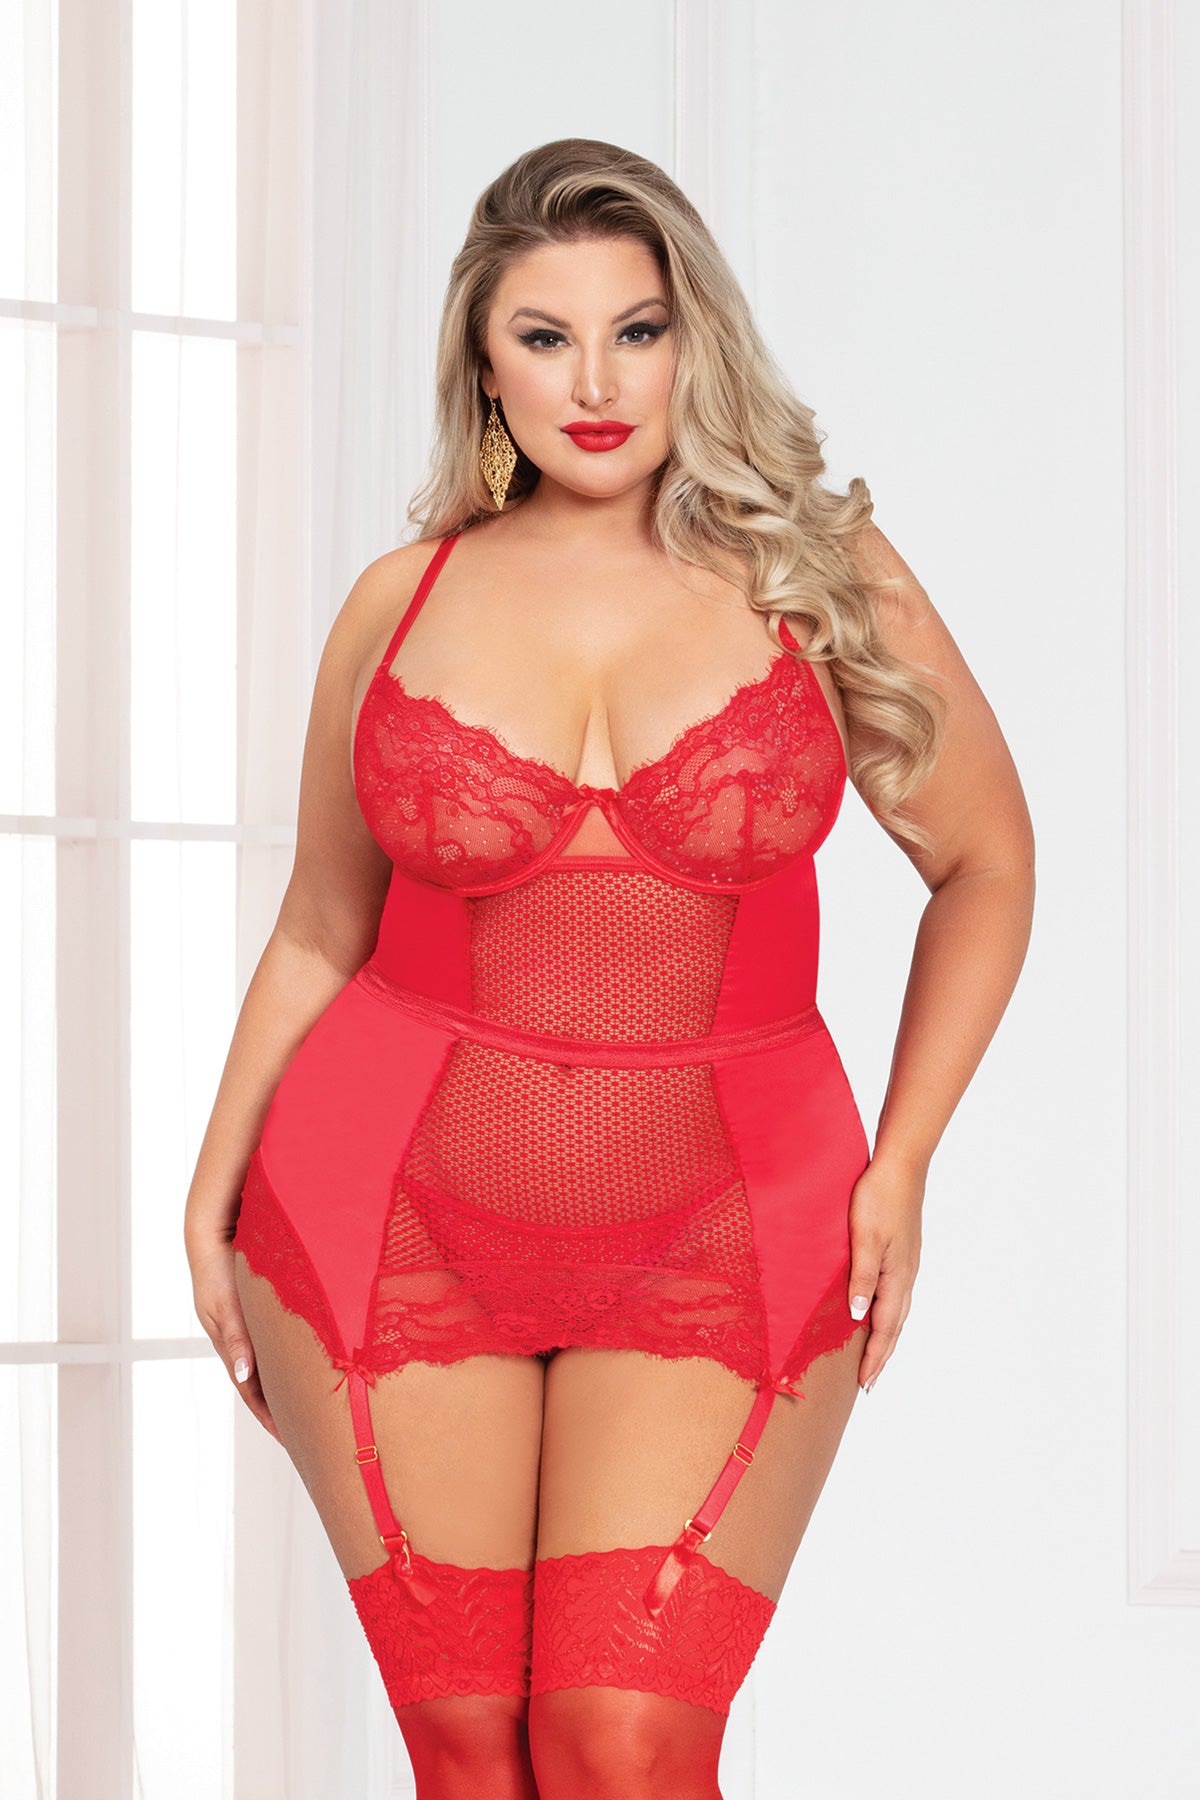 Two Piece Eyelash Lace, Stretch Satin, And Textured Netting Chemise With Elastic Criss-Cross Back And Thong Set Seven til Midnight  11045X